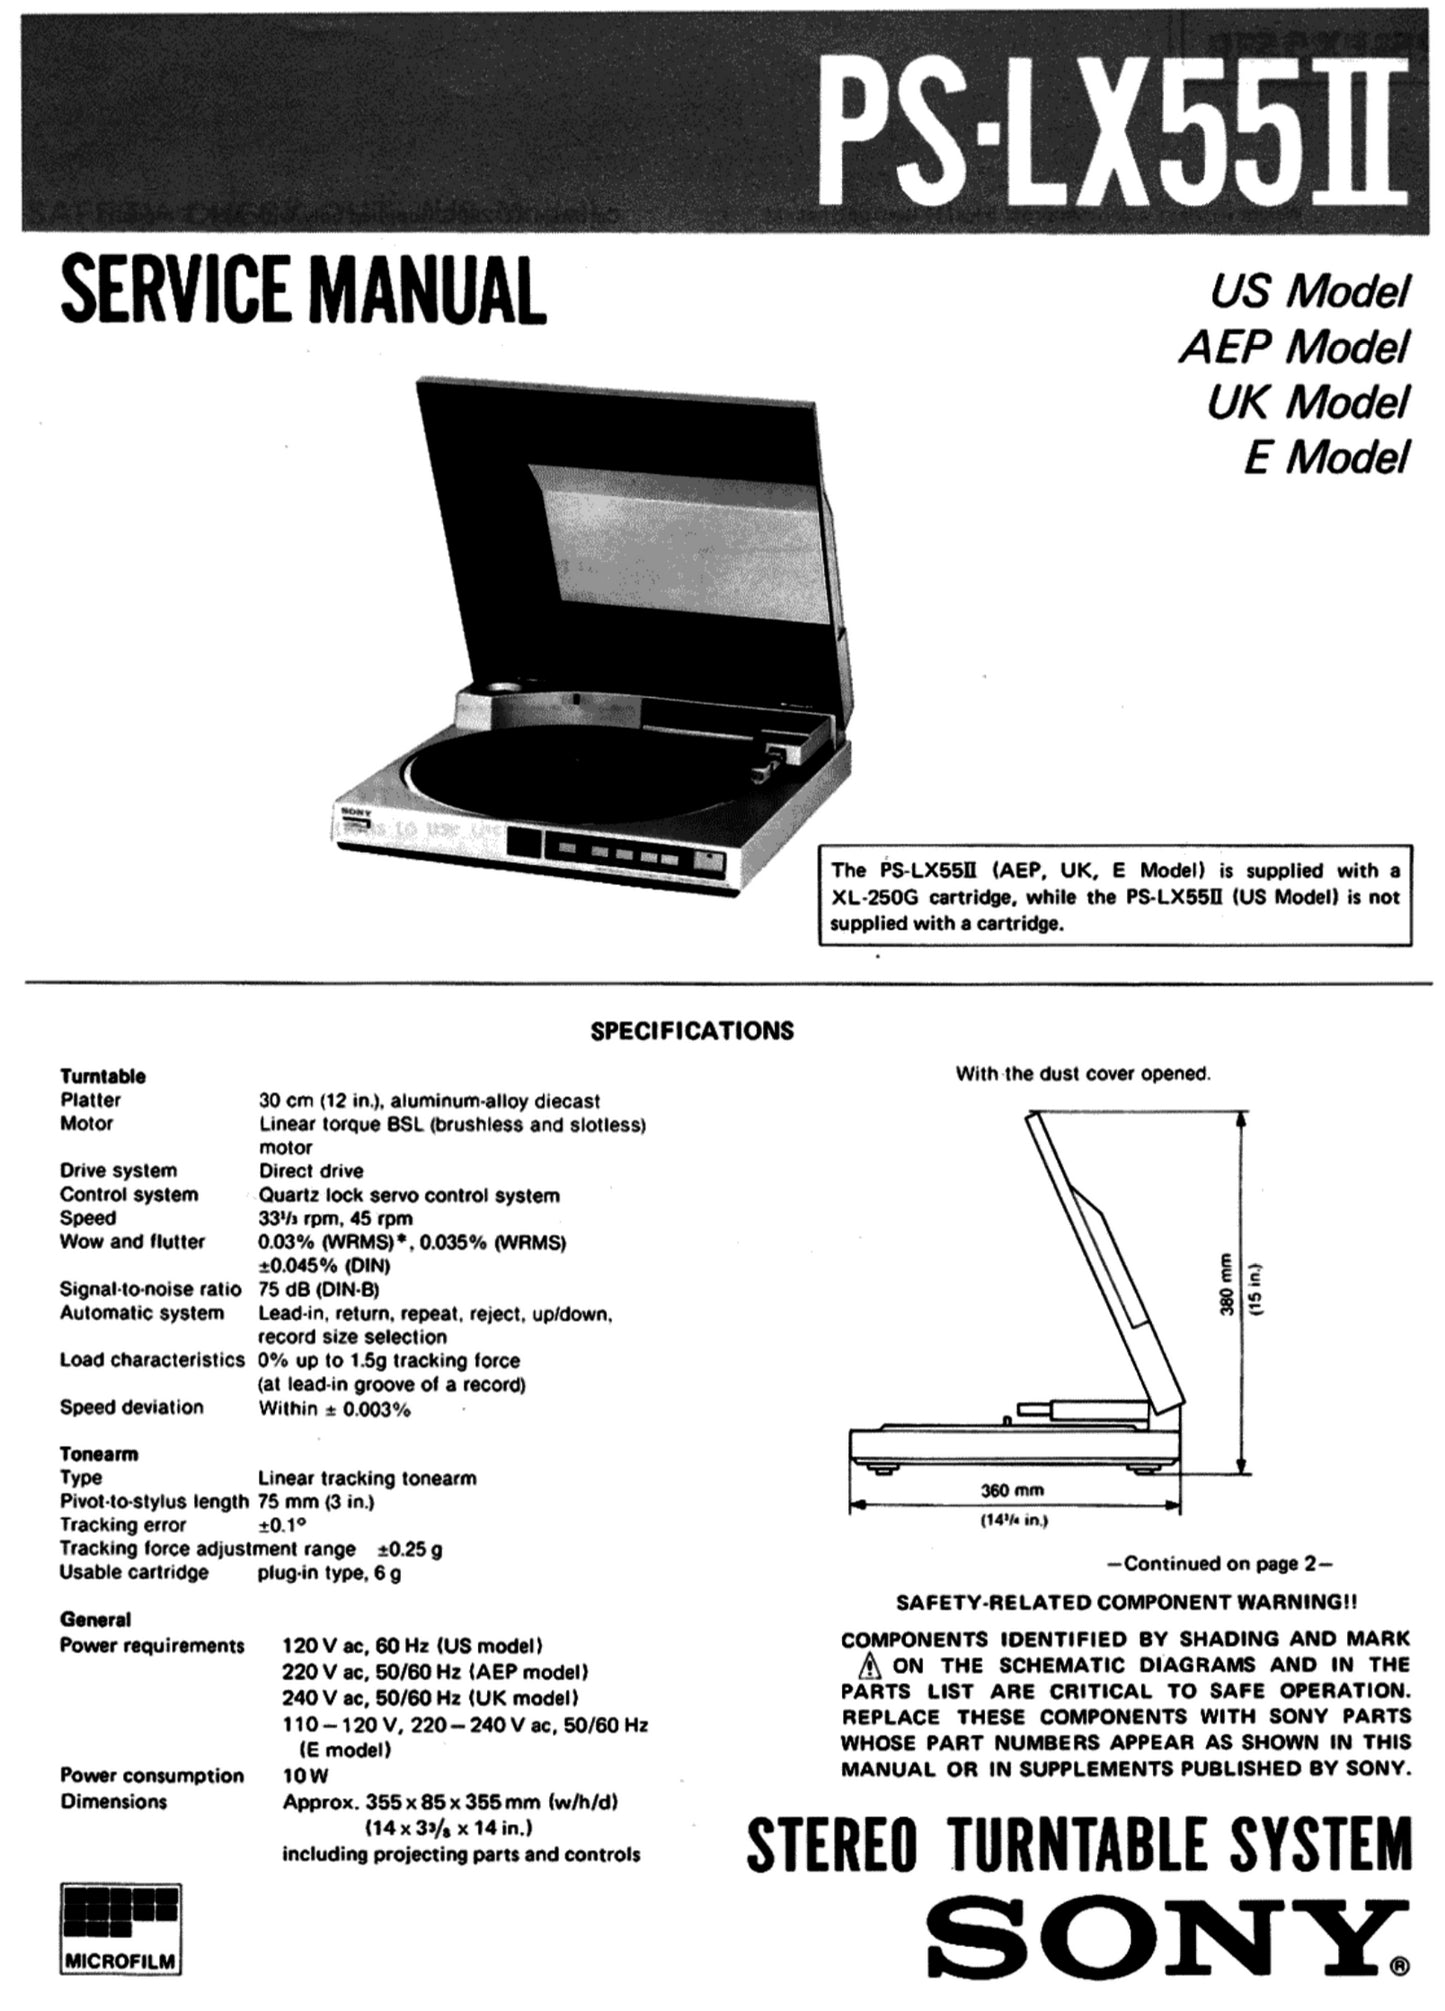 SONY PS-LX55II Service Manual Complete